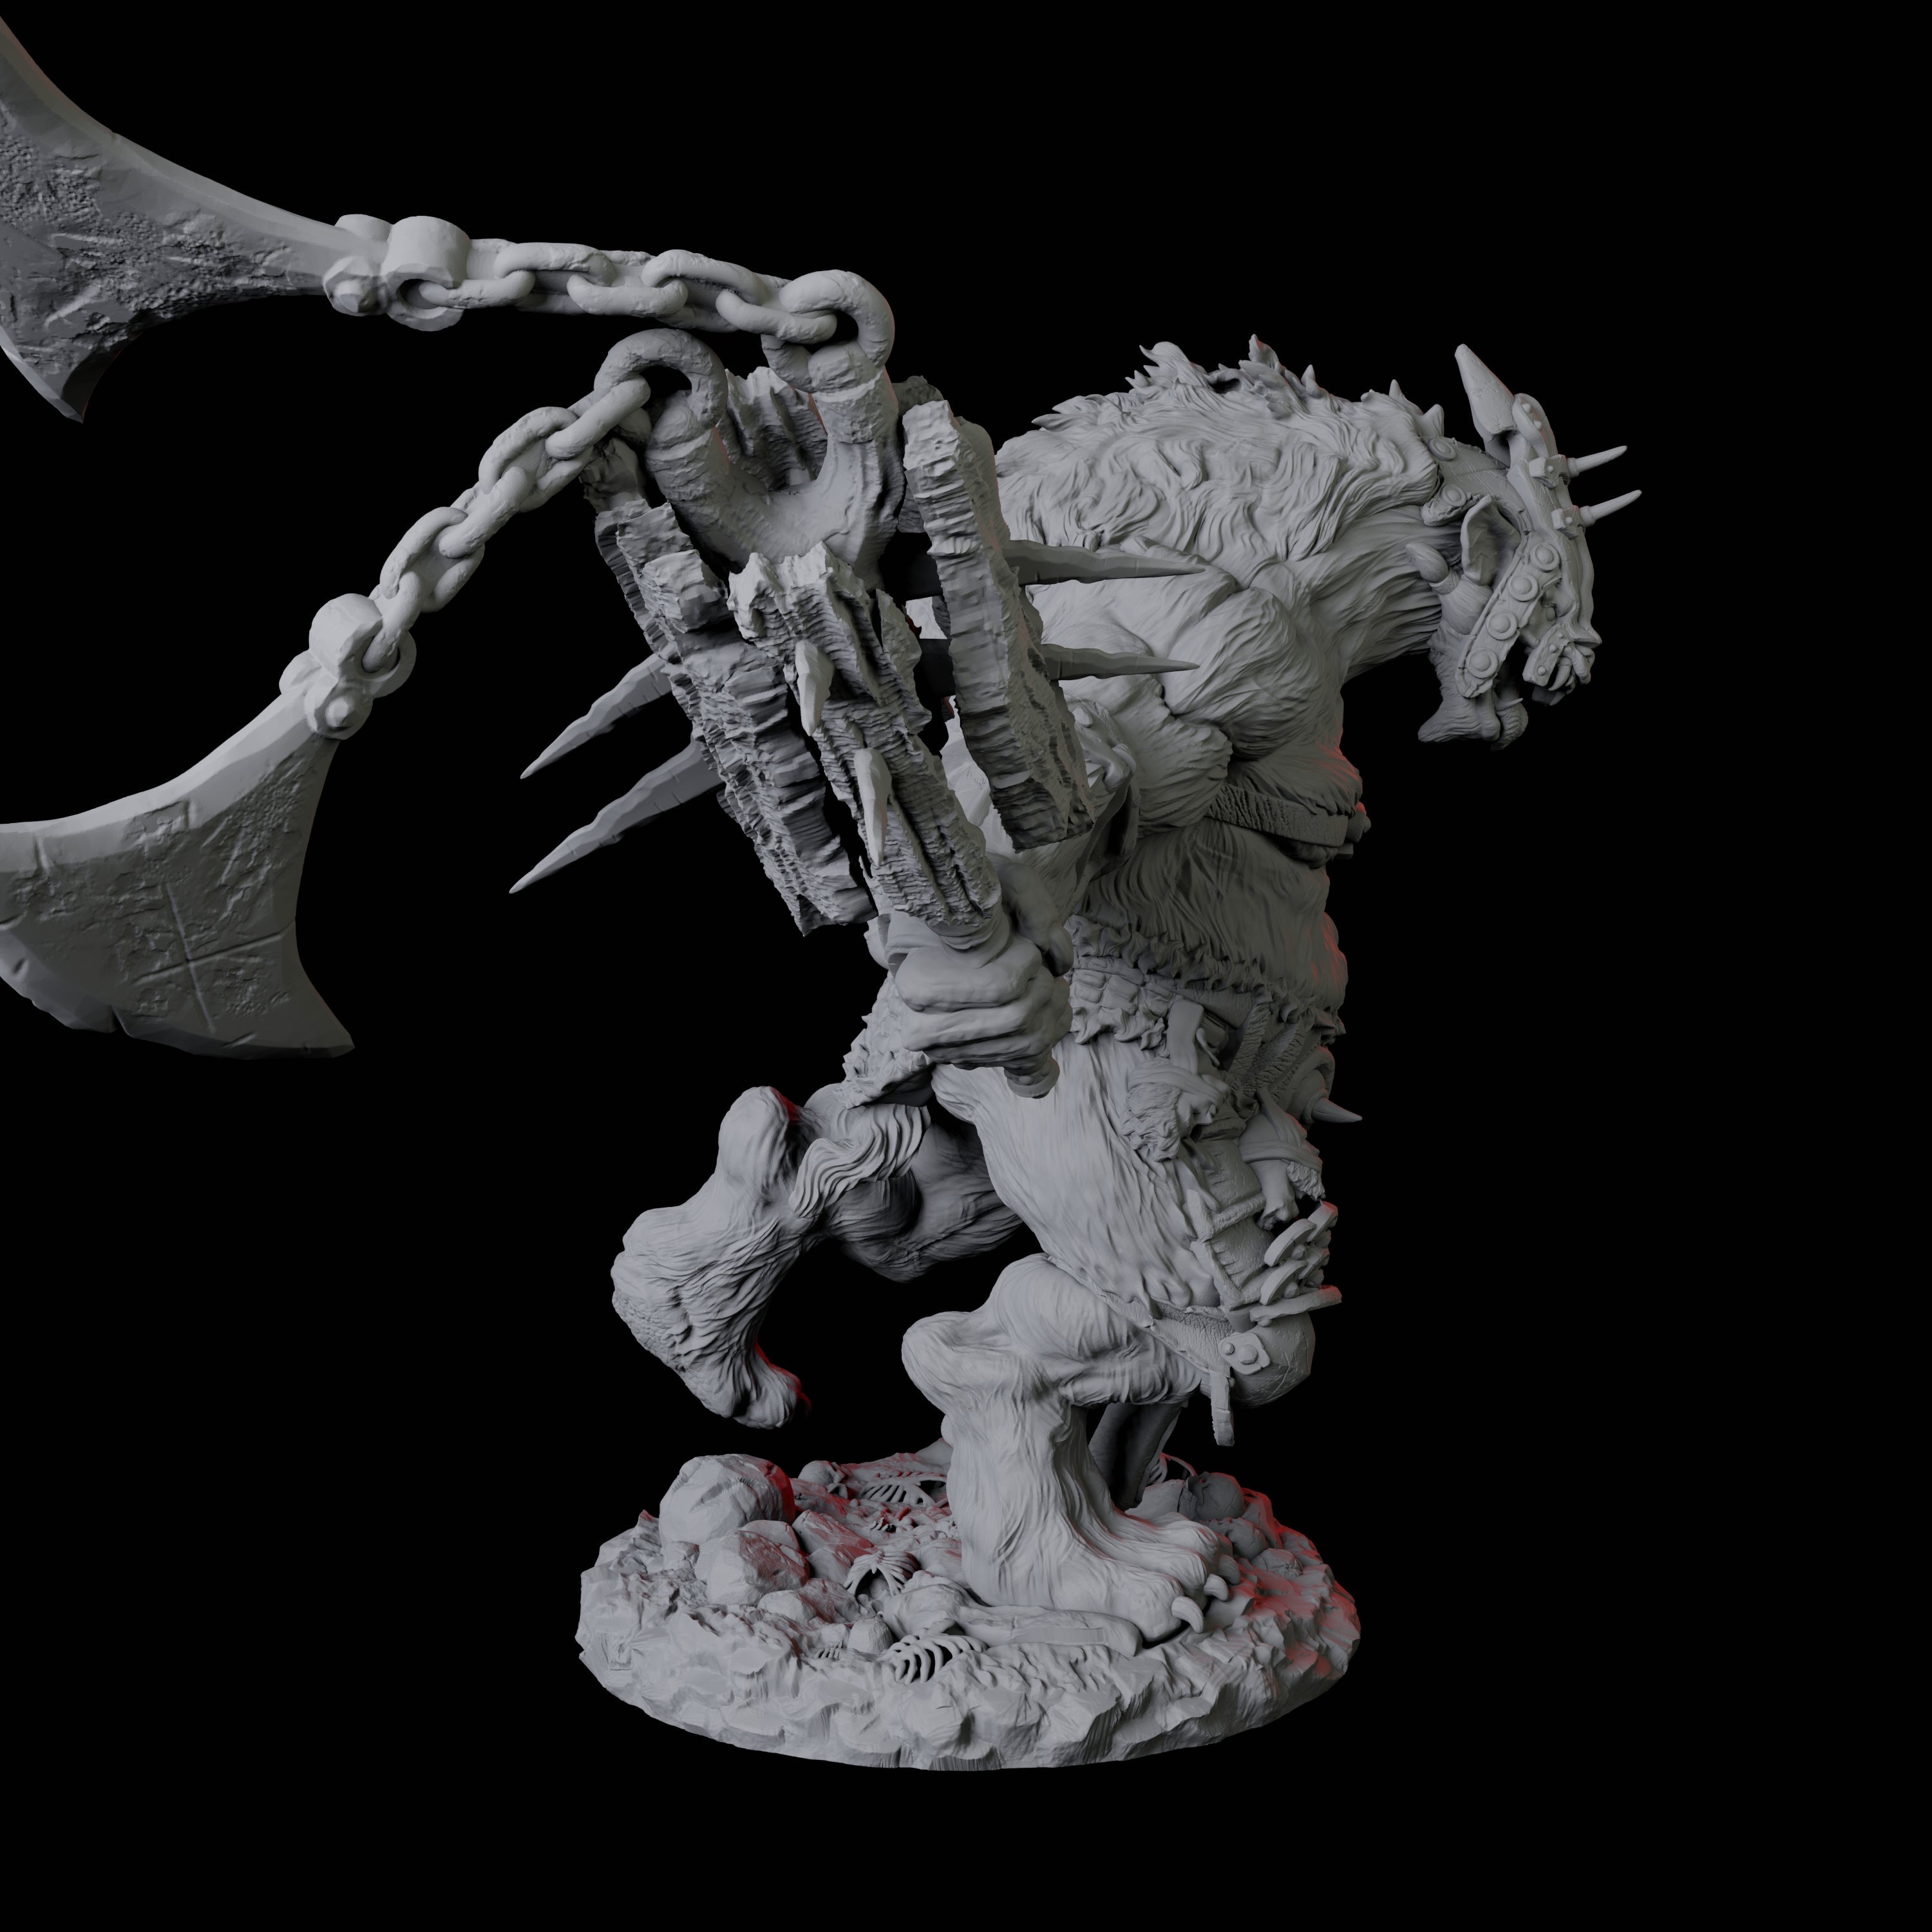 Gnoll Ettin B Miniature for Dungeons and Dragons, Pathfinder or other TTRPGs